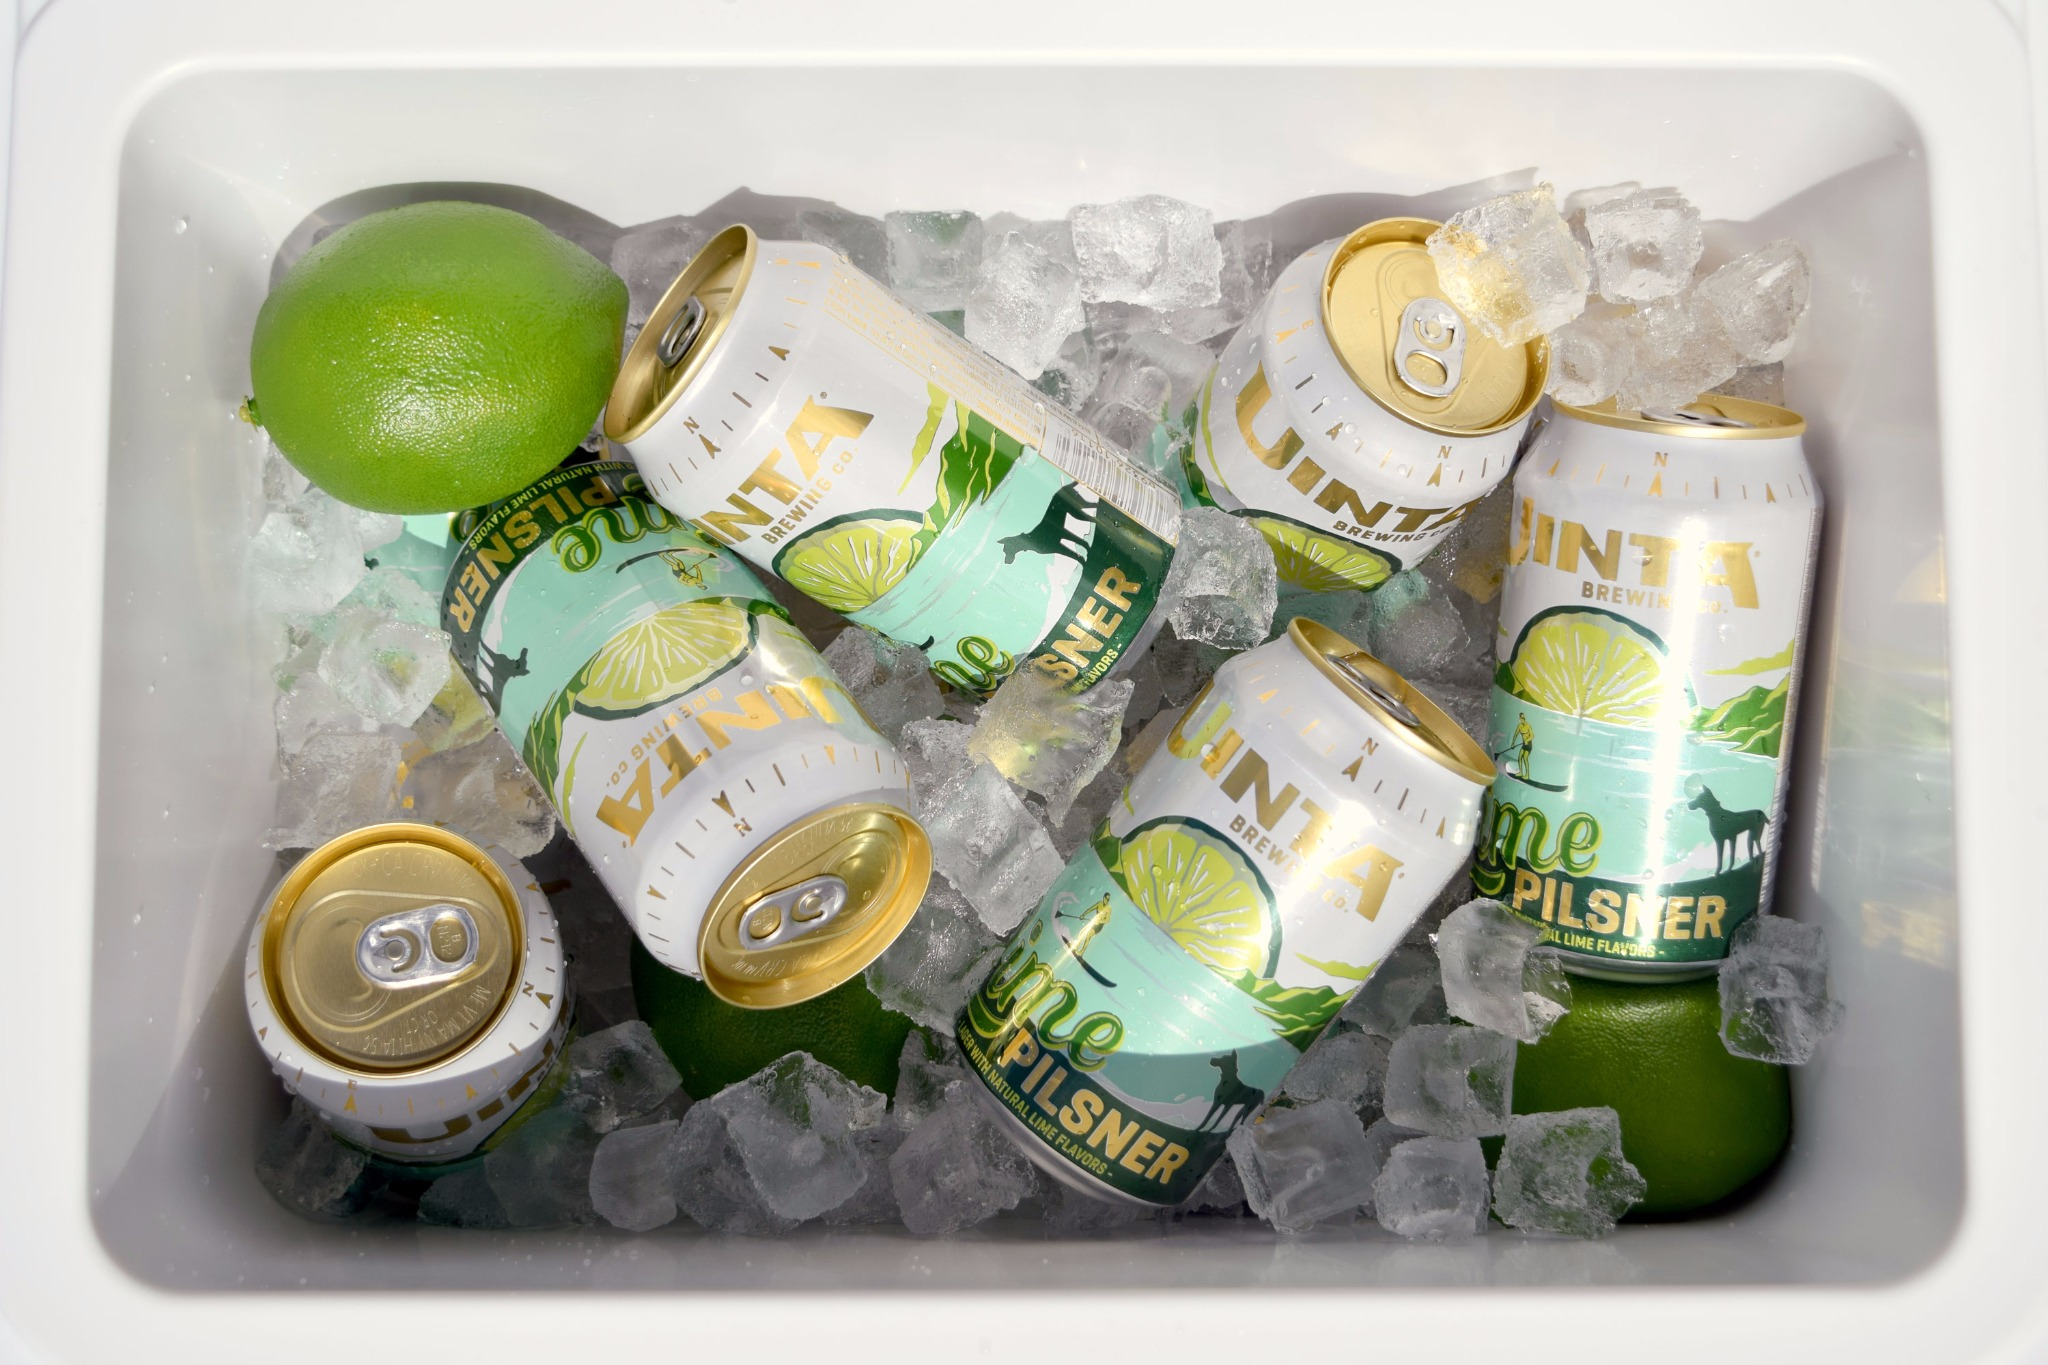 Uinta Brewing Company Lime Pilsner Awareness Campaign